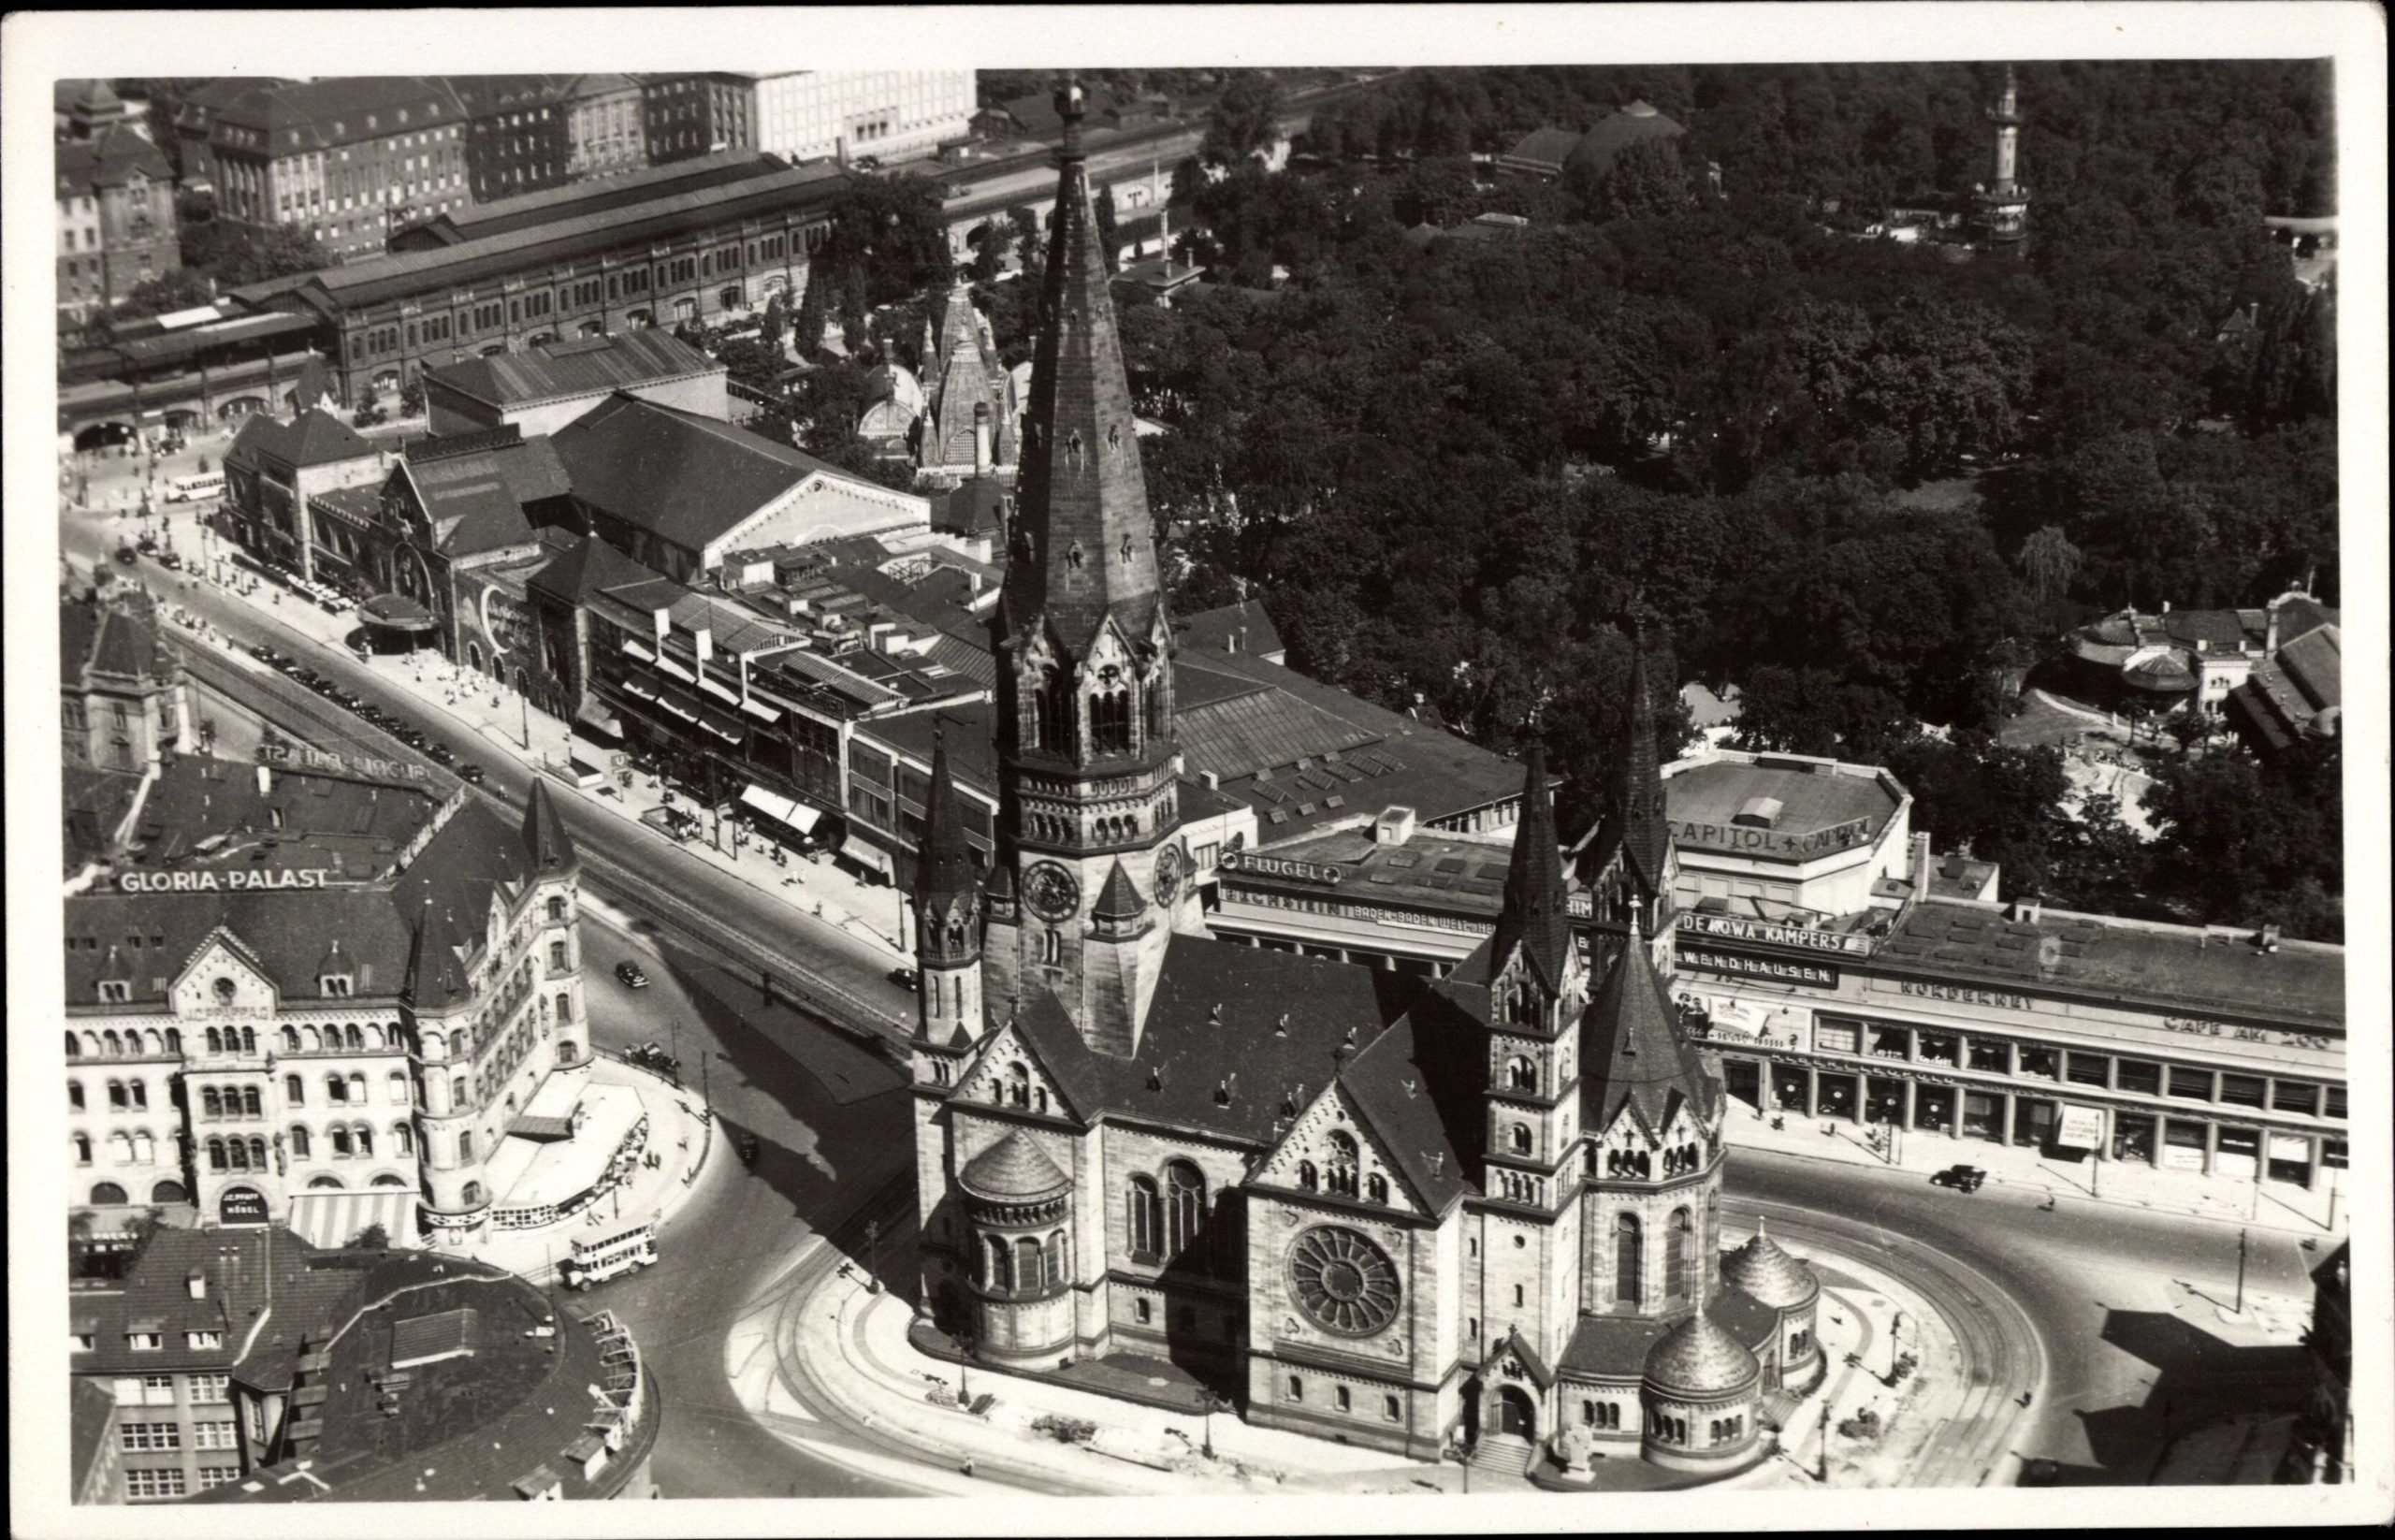 Kurfürstendamm with Memorial Church and Gloria Palace, historical aerial view from the 1930s.  Photo: Imago/arkivi